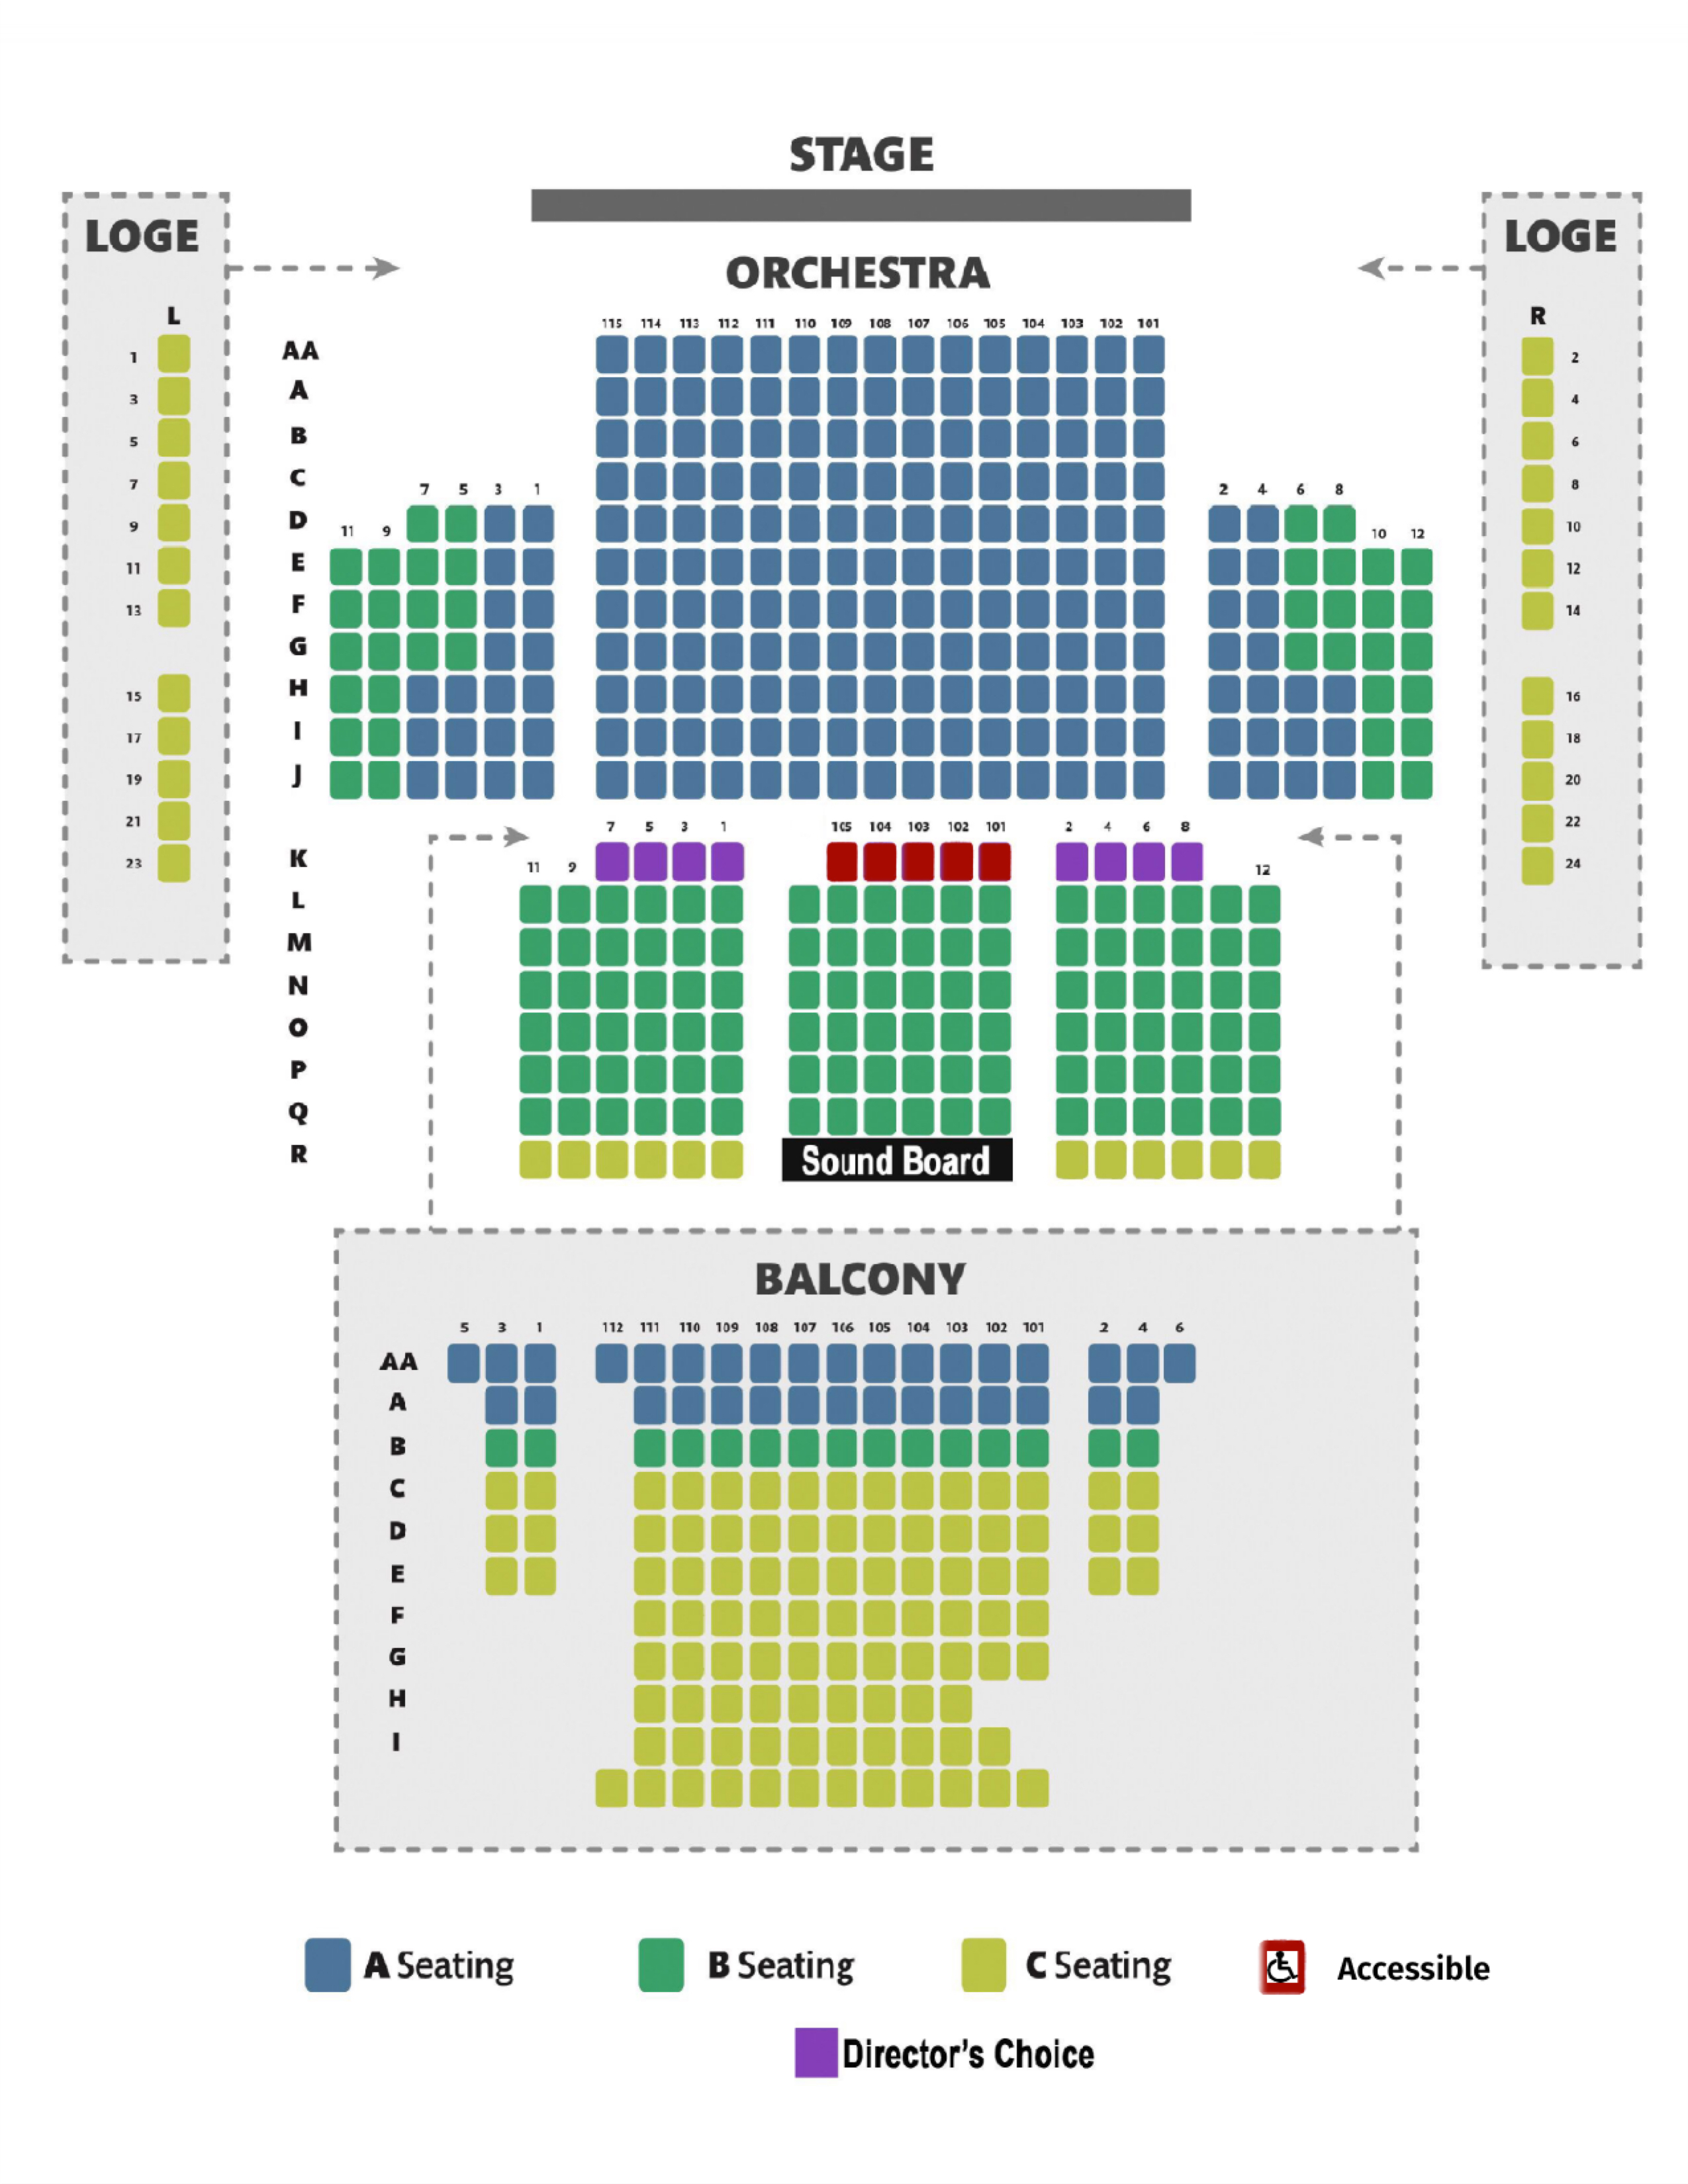 The Beckett Theatre Seating Chart